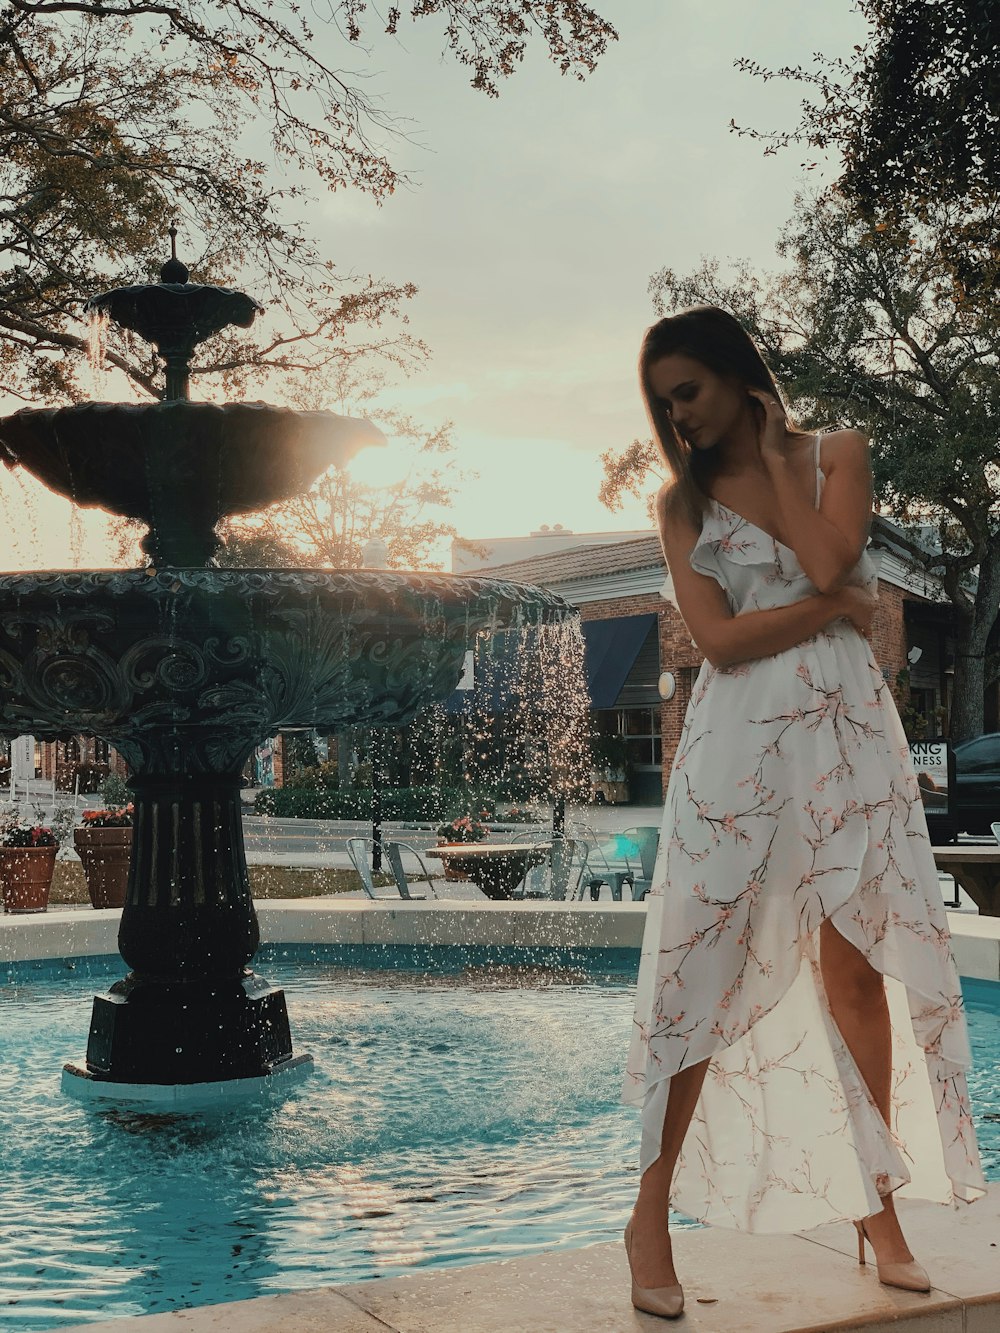 woman in white sleeveless dress standing near water fountain during daytime